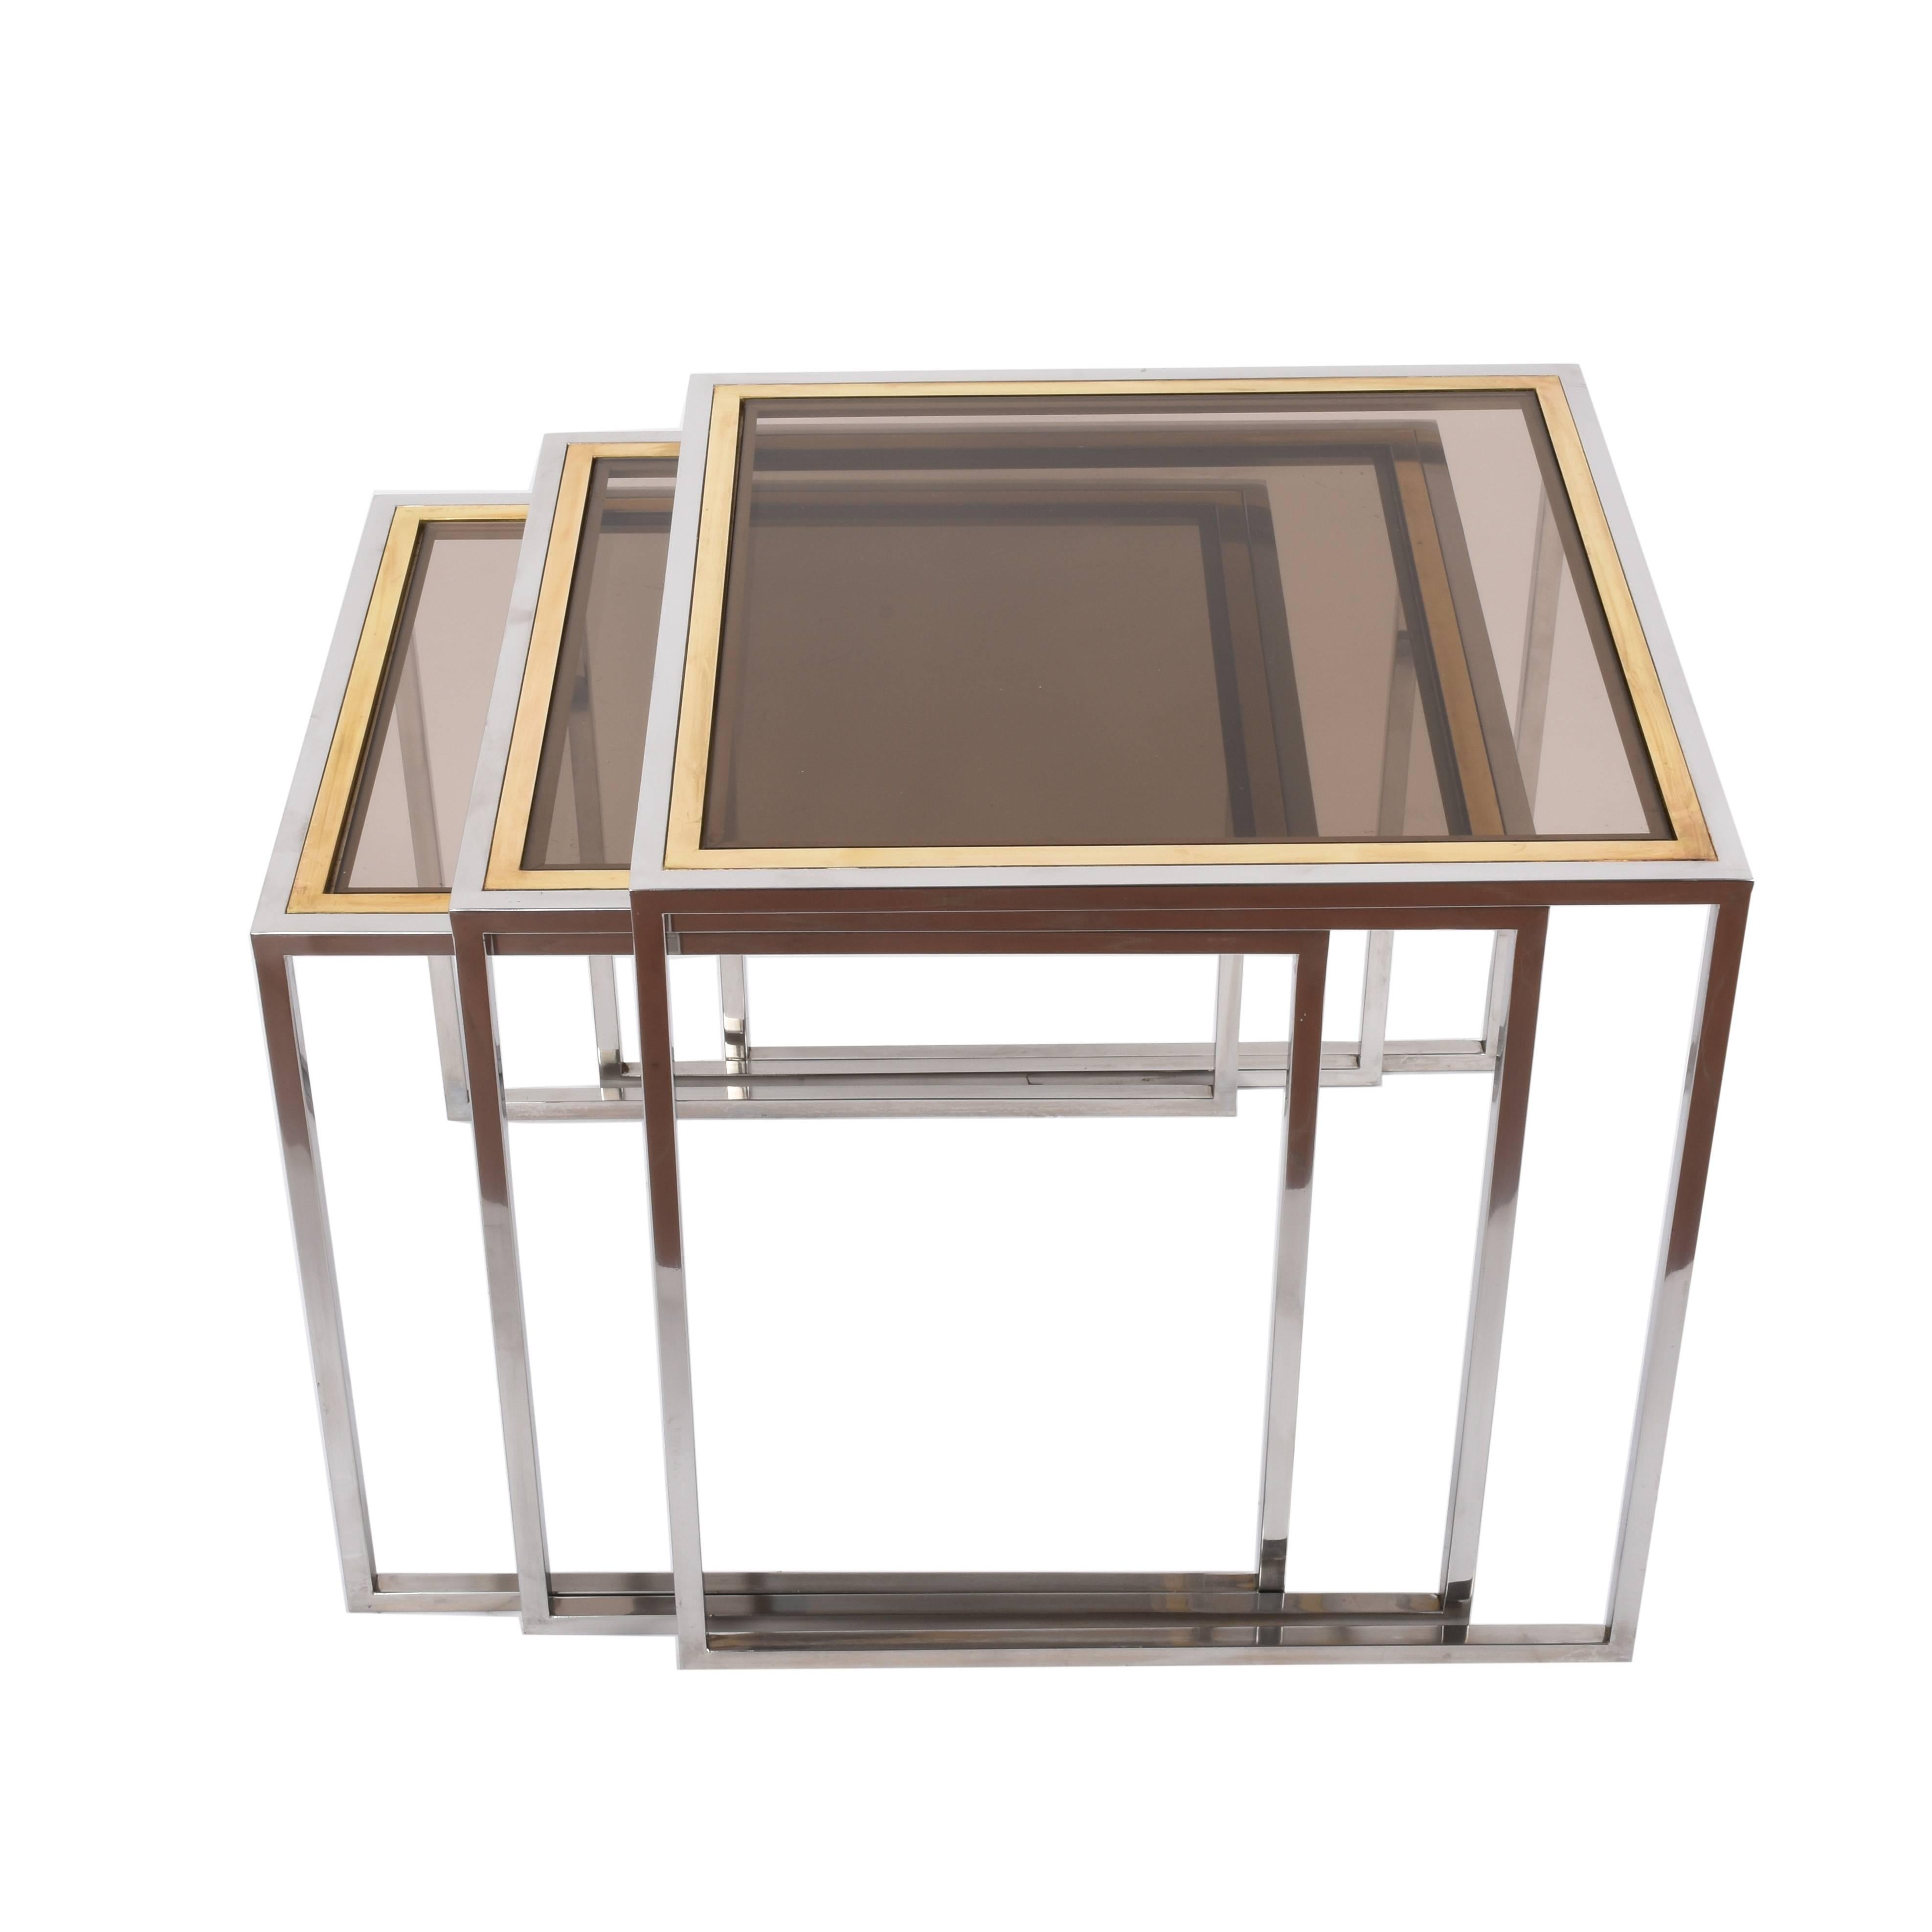 Midcentury Chrome, Brass and Smoked Glass Italian Nesting Tables, 1970s For Sale 2